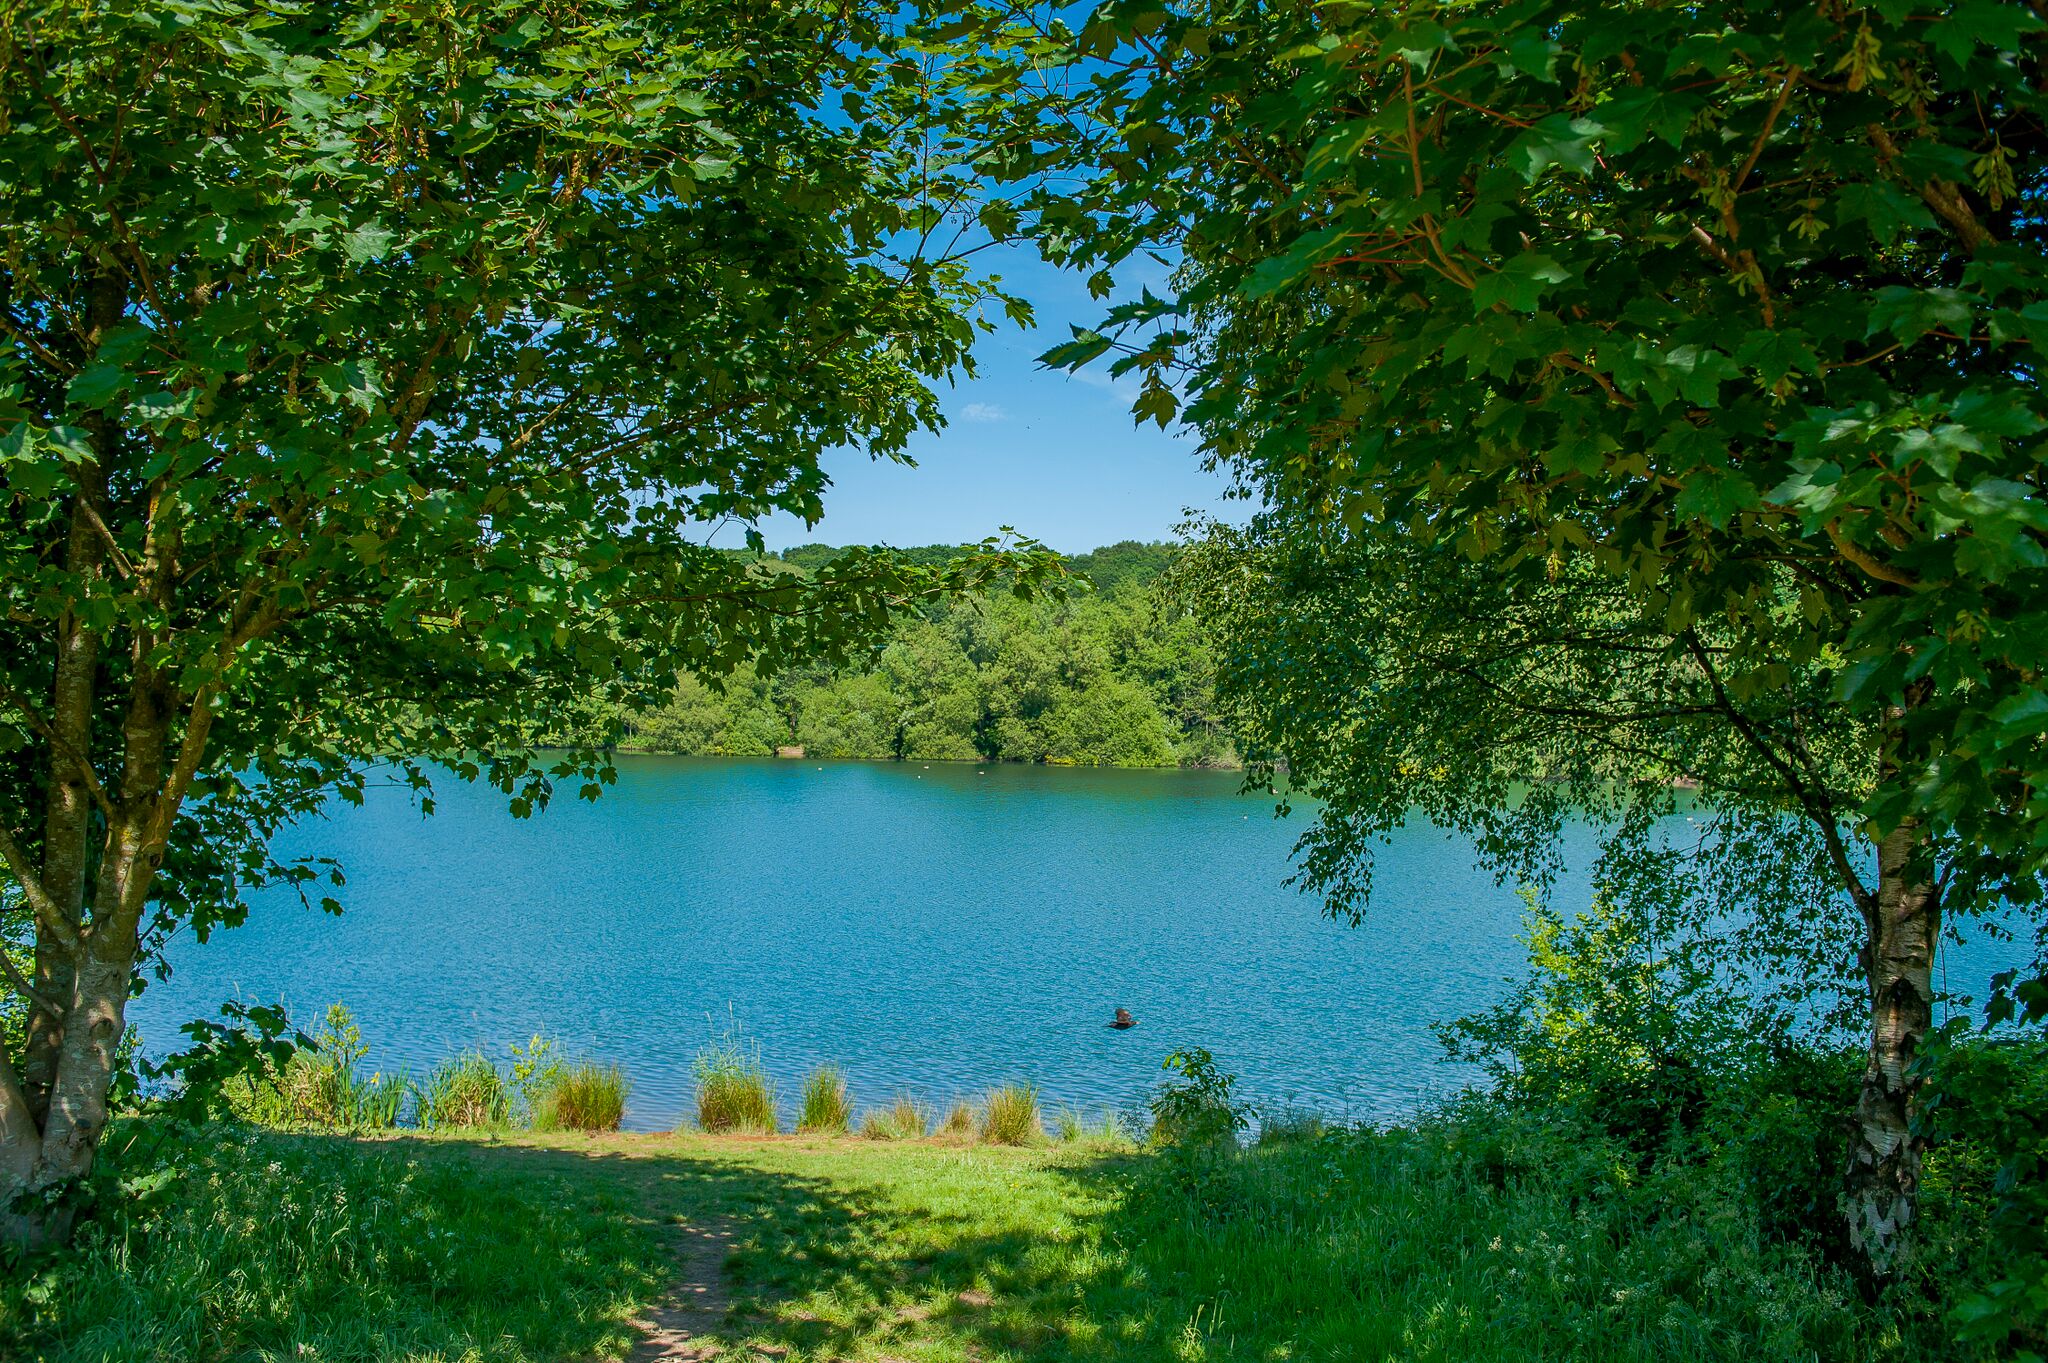 The lake in Clifton Country Park